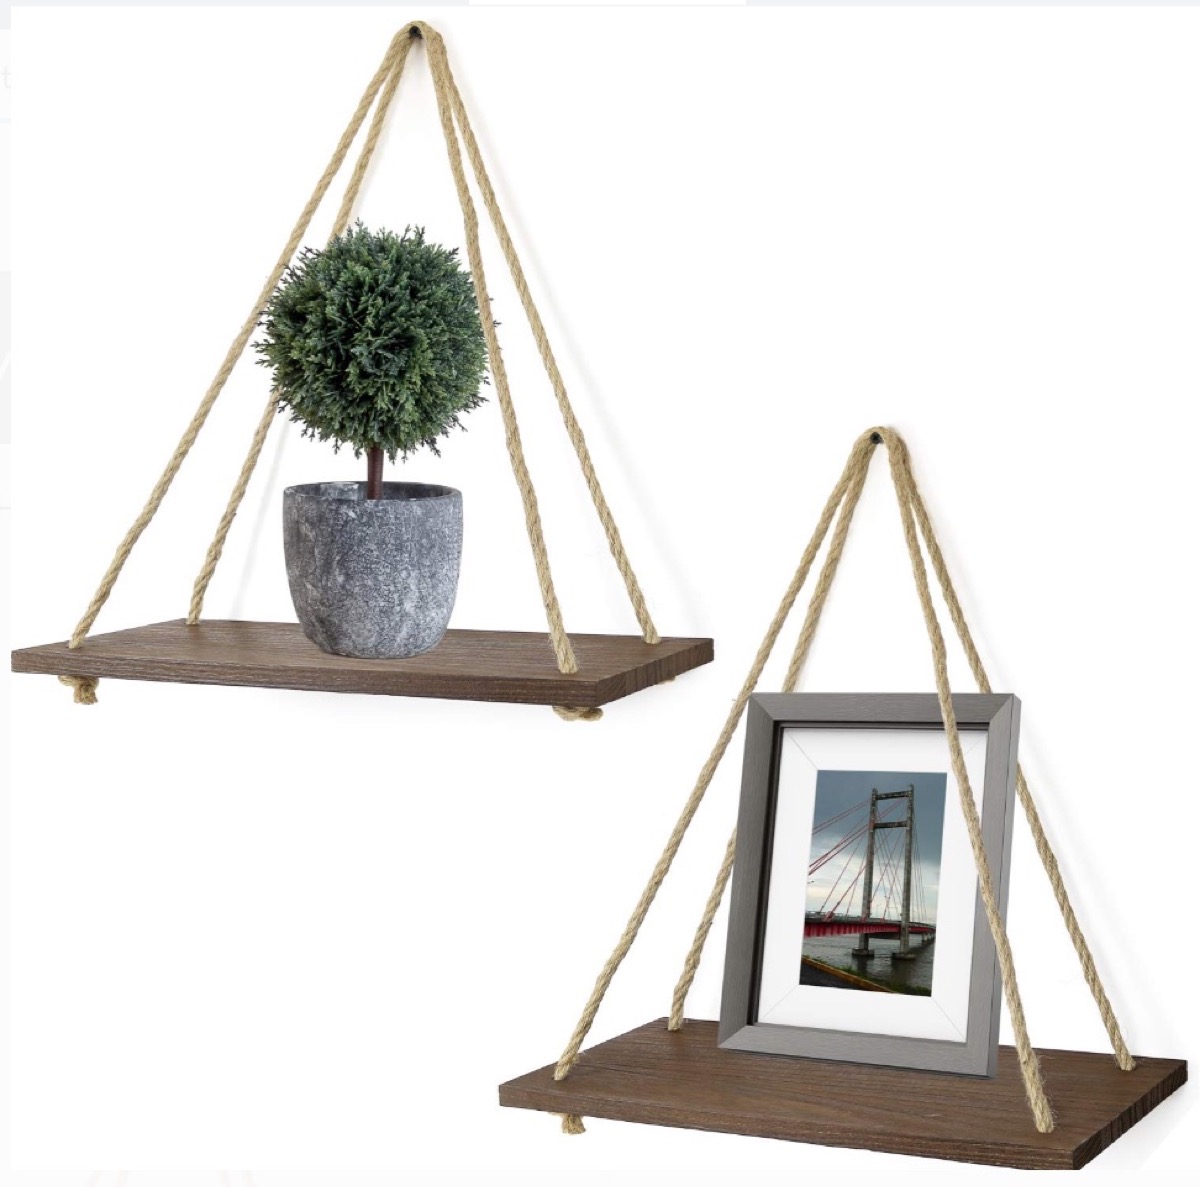 two triangular wooden shelves with jute hangers